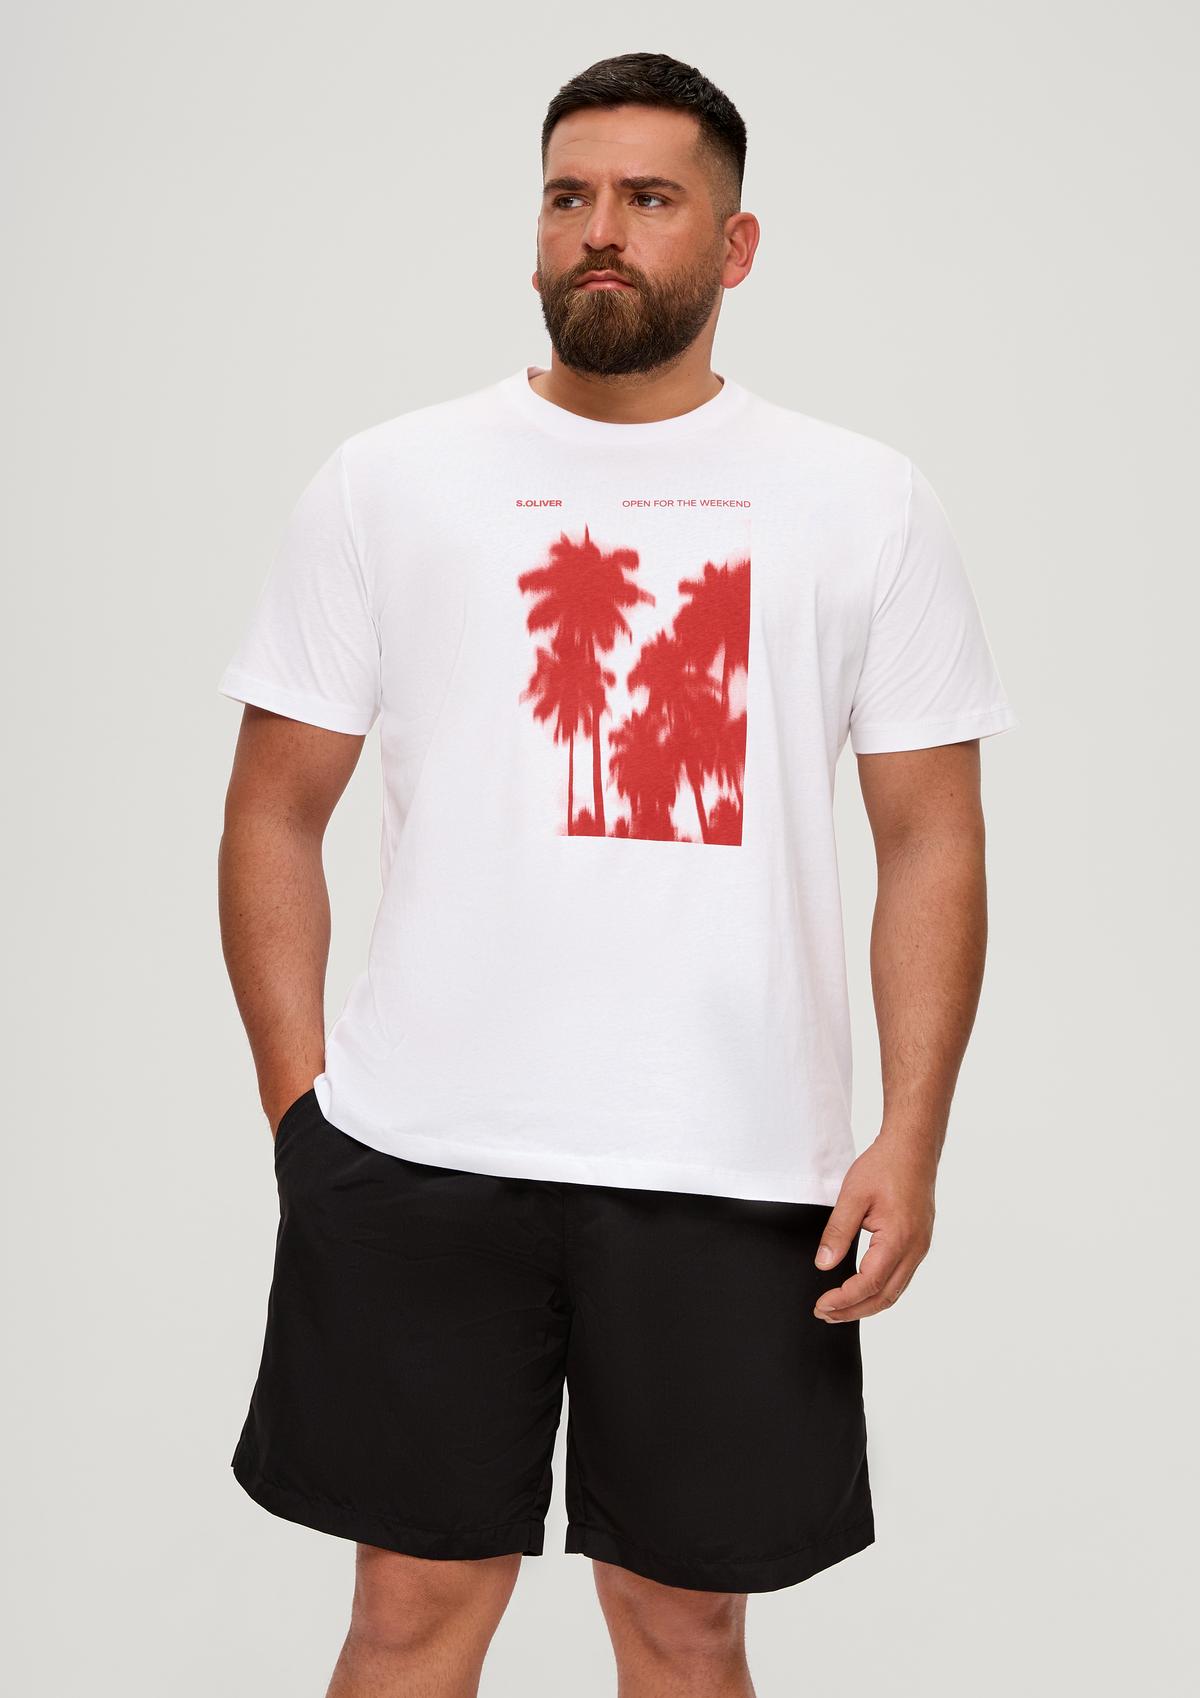 T-shirt in pure cotton white 